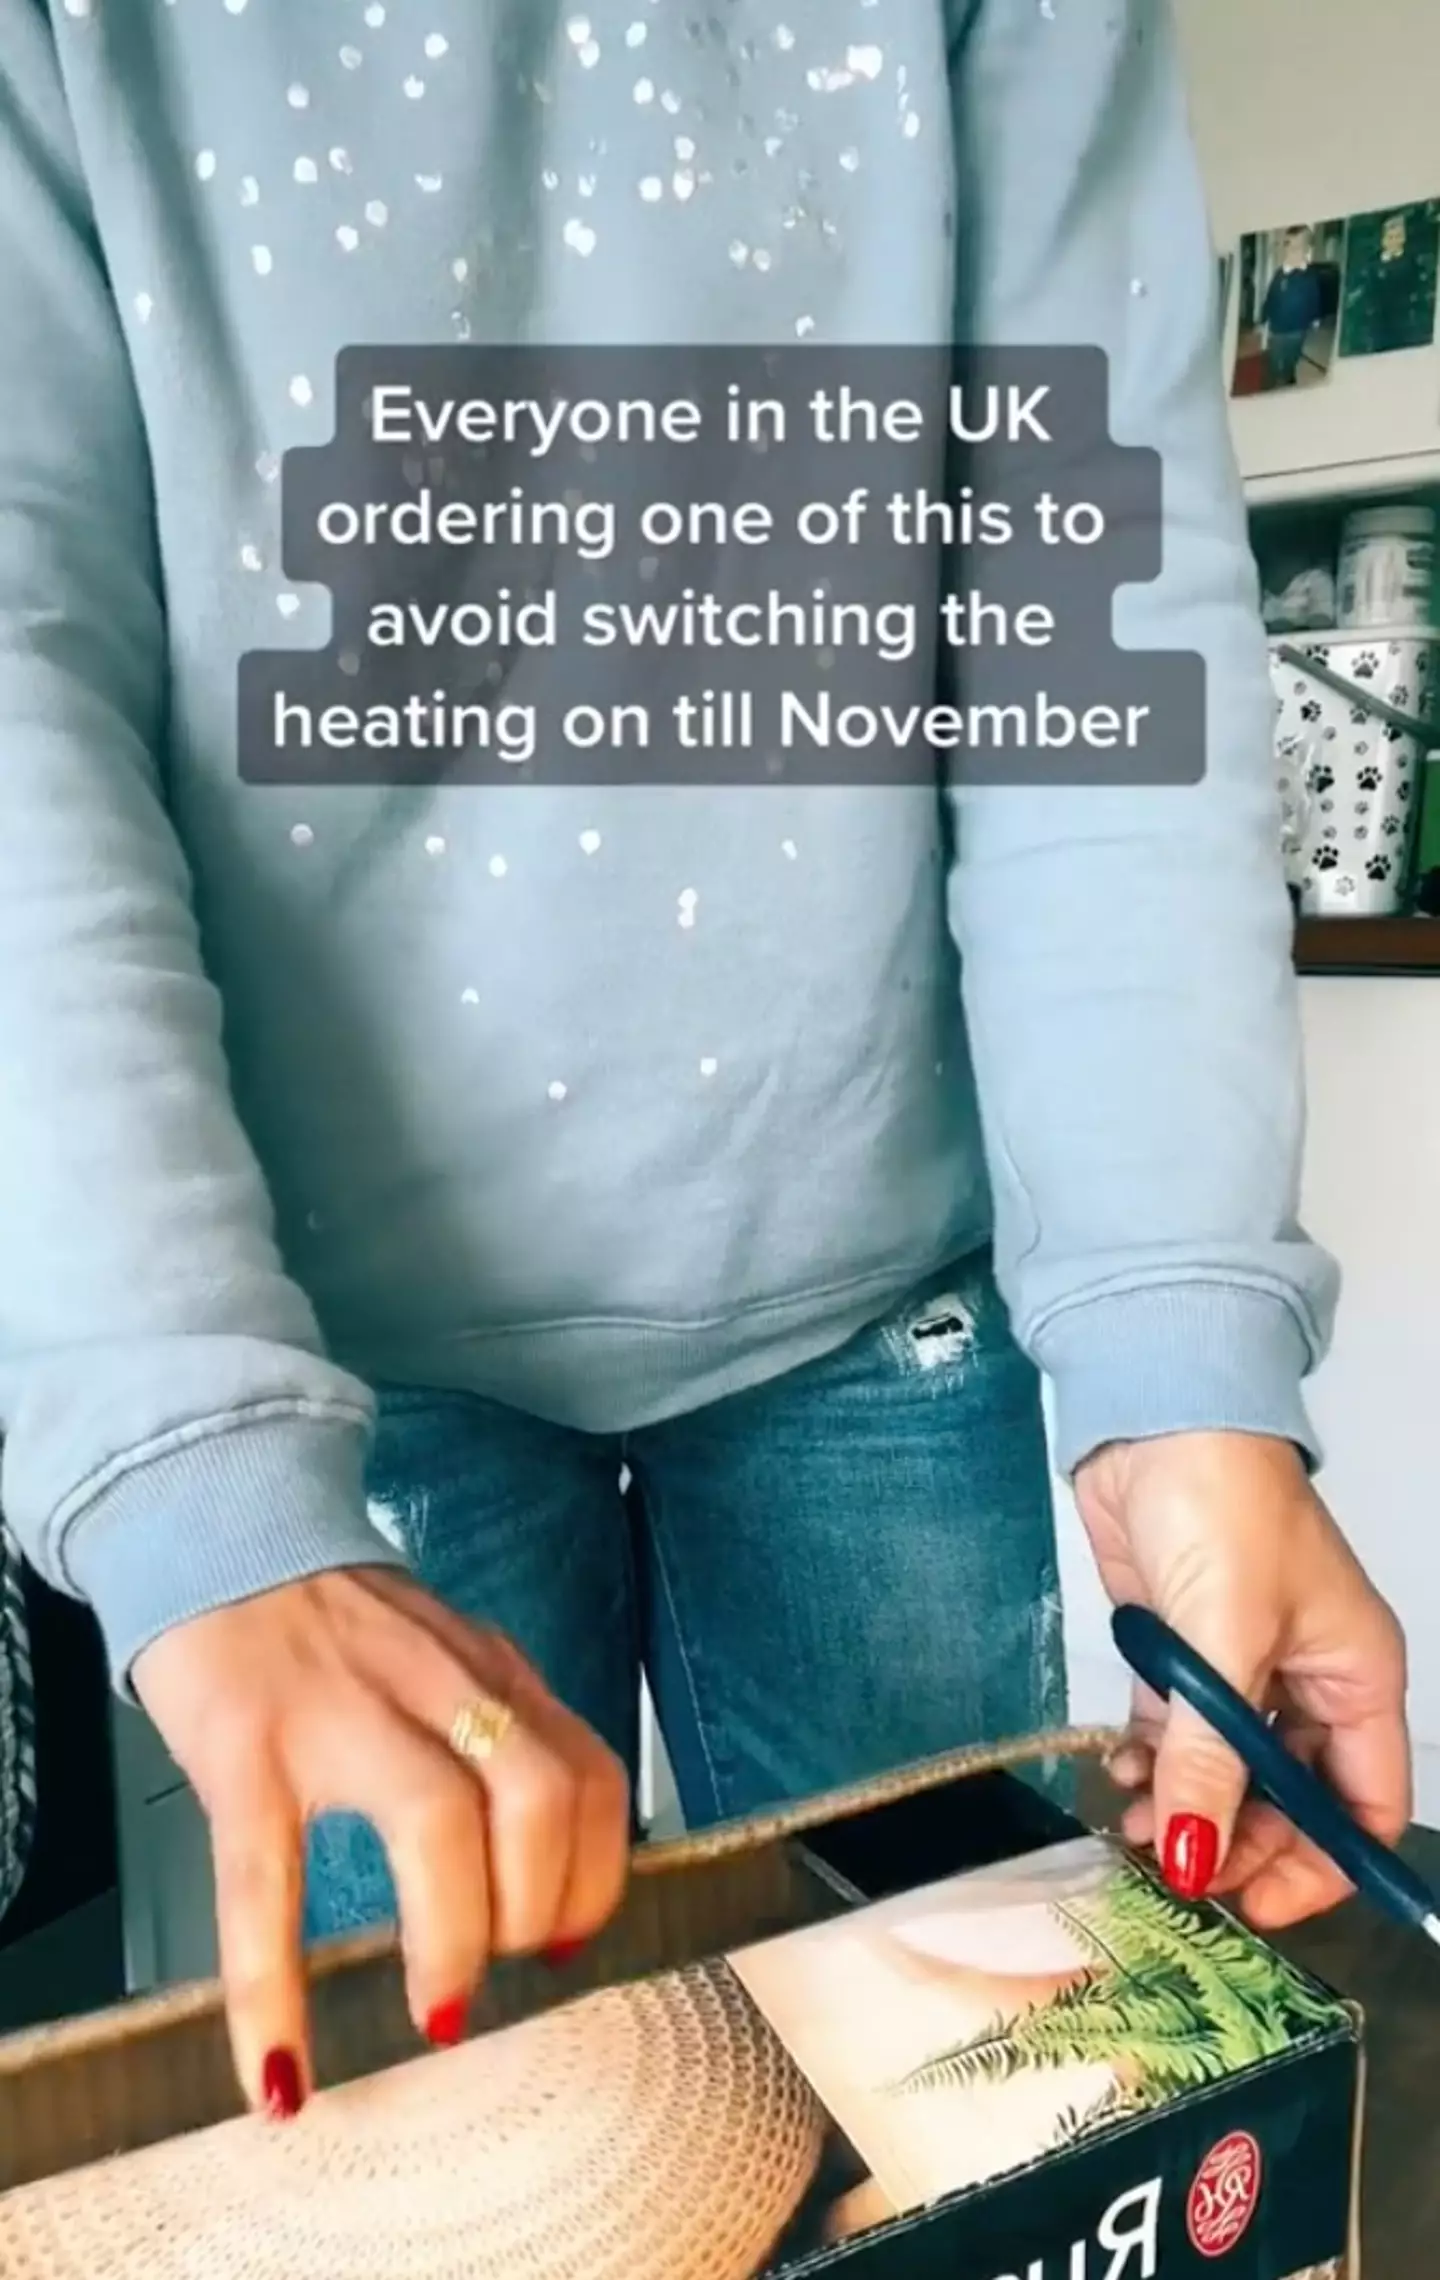 Placi shared her alternative to turning on the heating on TikTok.